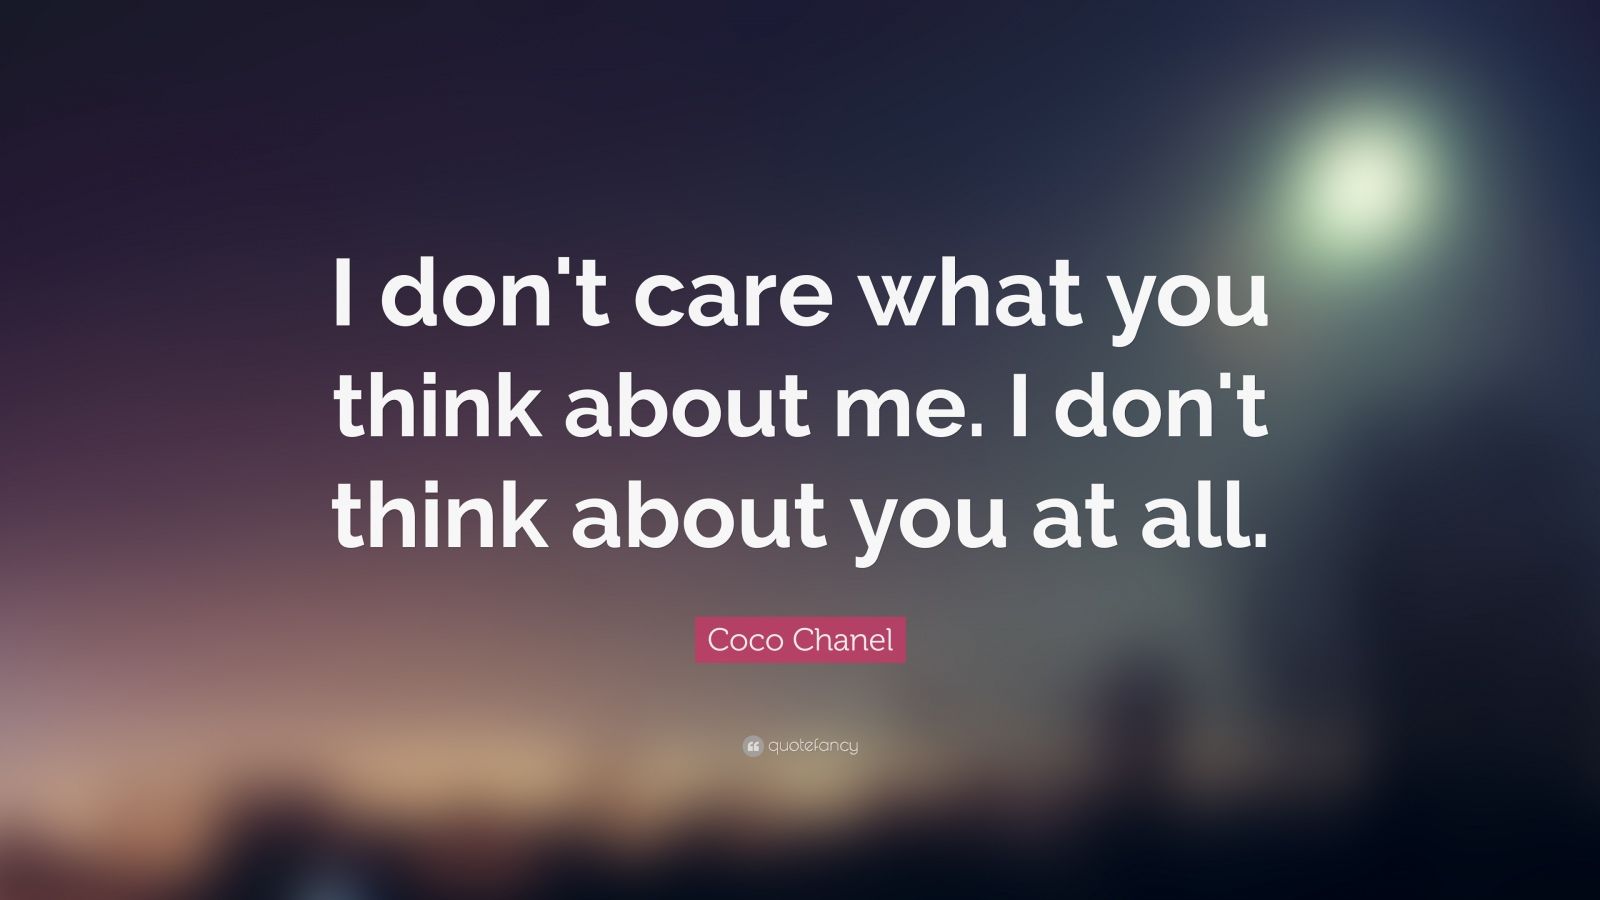 Coco Chanel Quote: I dont care what you think about me 